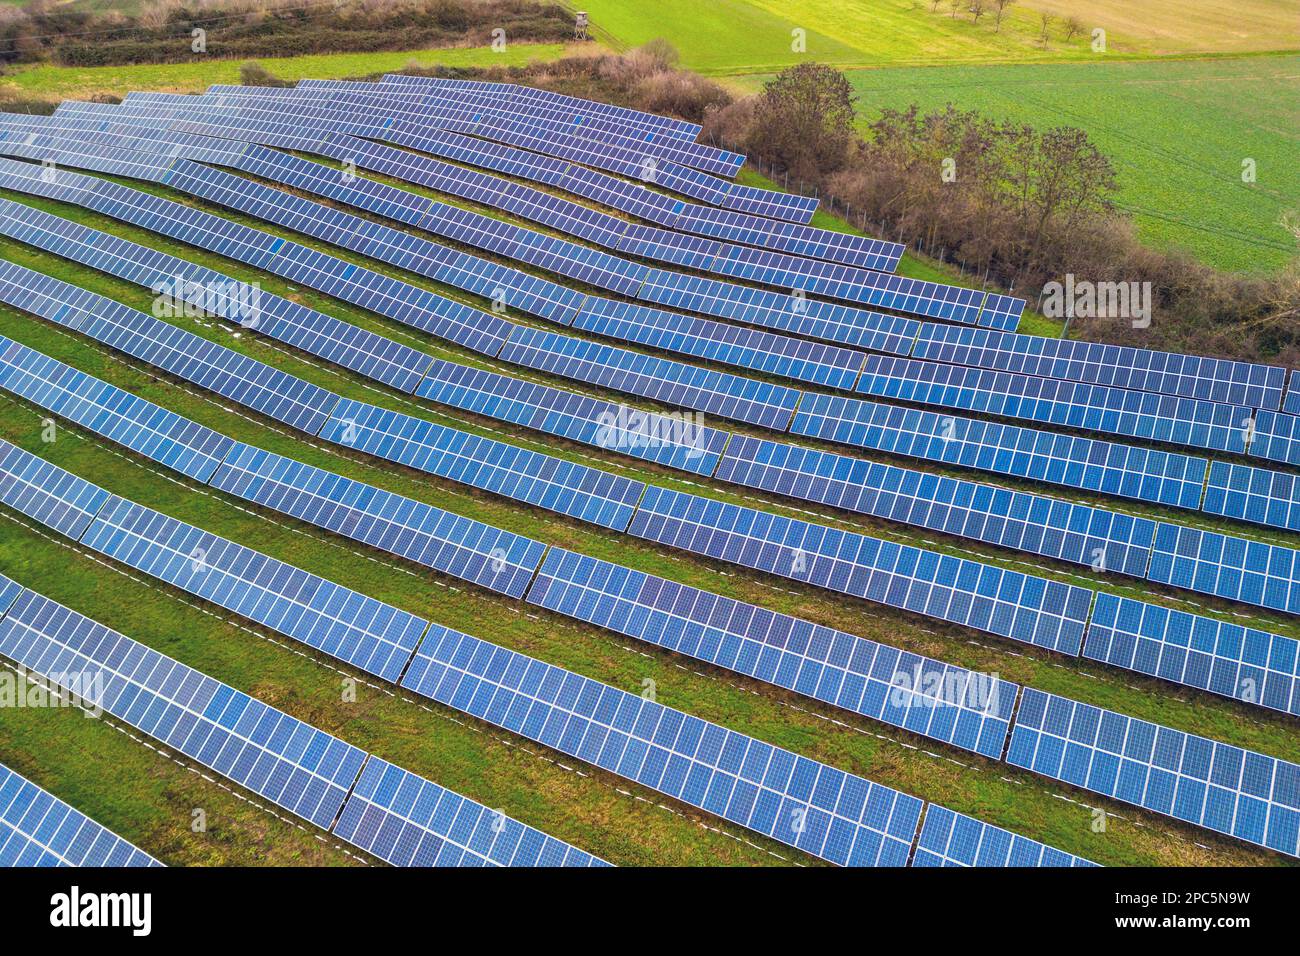 Module of a large photovoltaic solar panels on an open space of a solar park in a rural environment in Germany Stock Photo